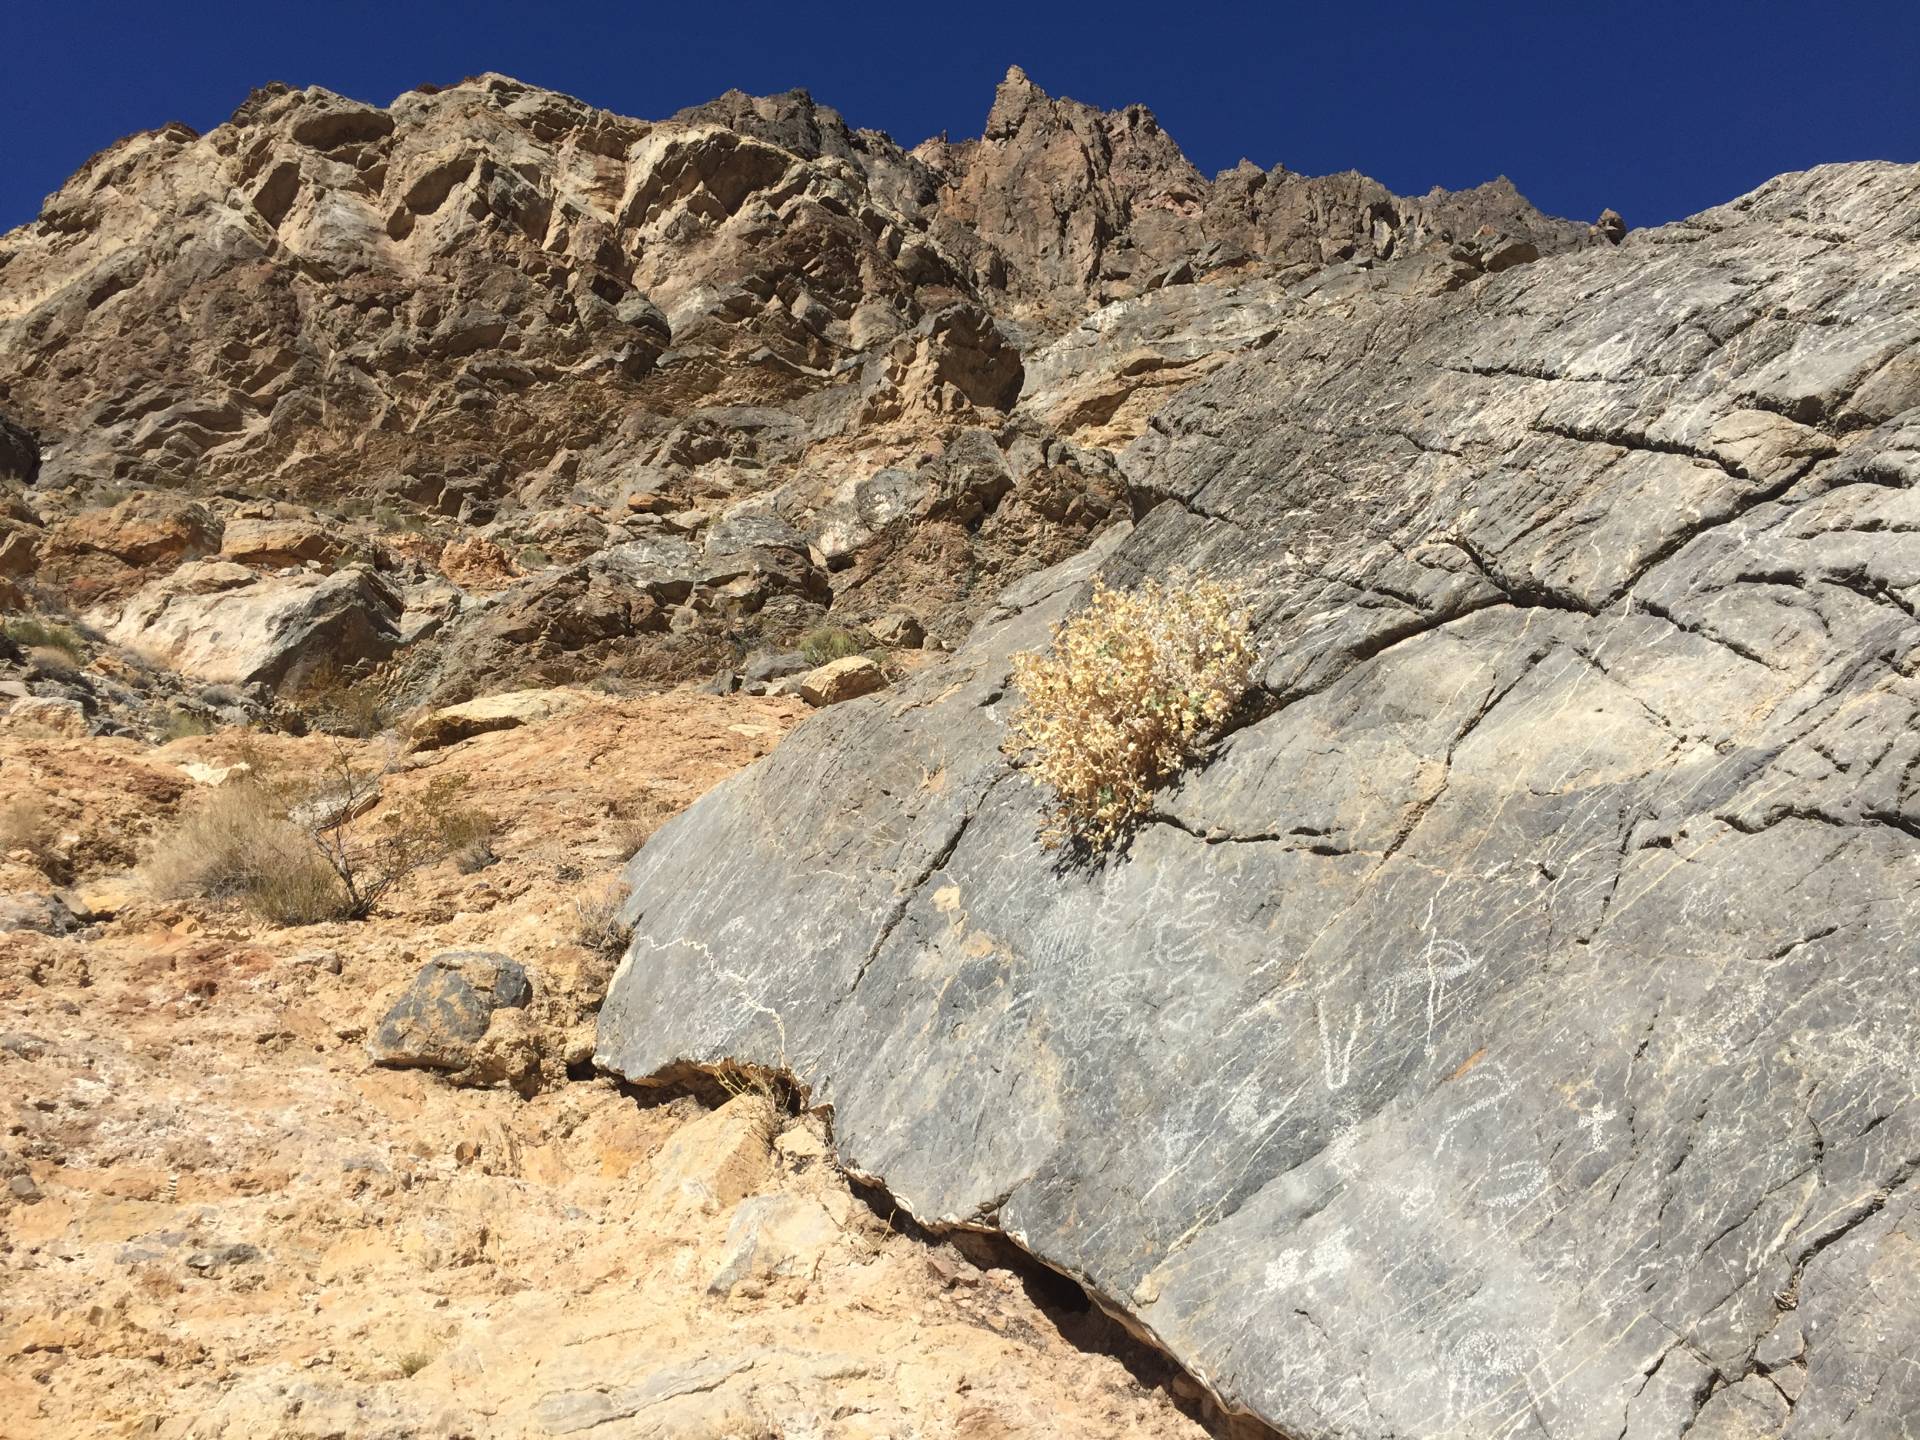 Petroglyphs in Titus Canyon, Death Valley National Park, California